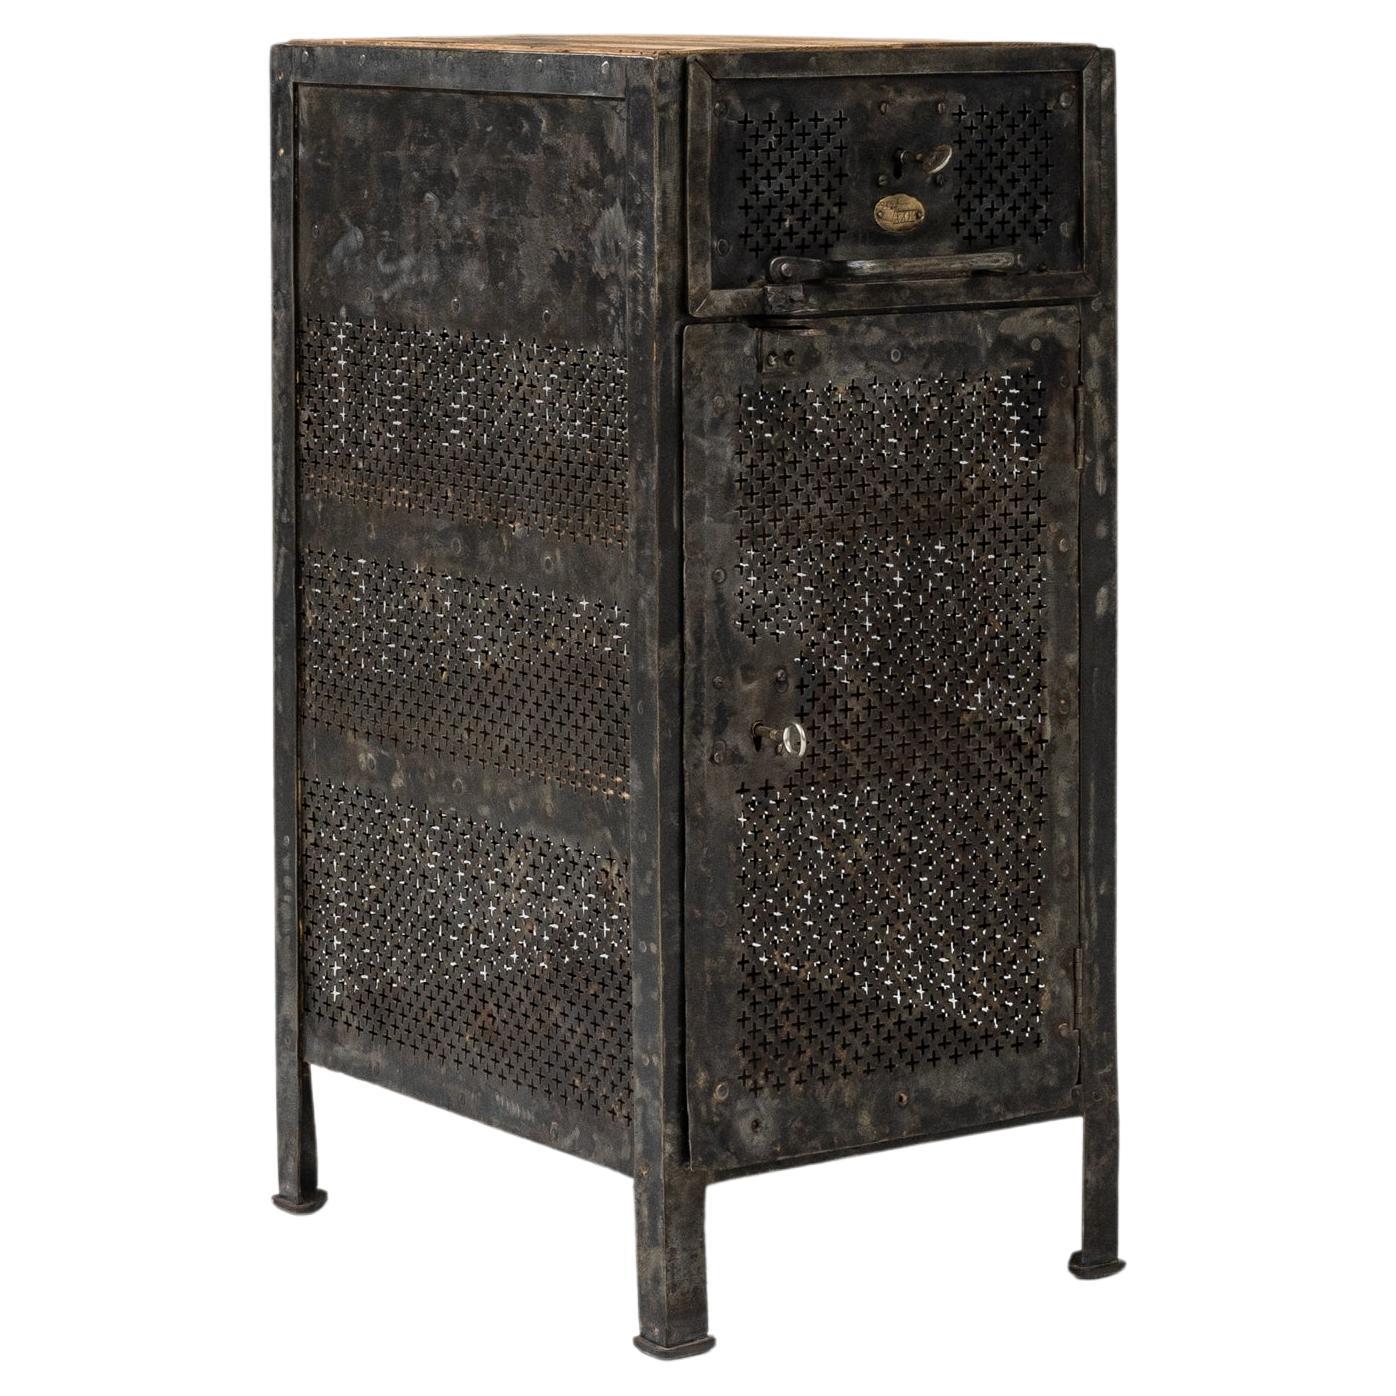 Early 20th Century French Metal Bedside Table With Wooden Top